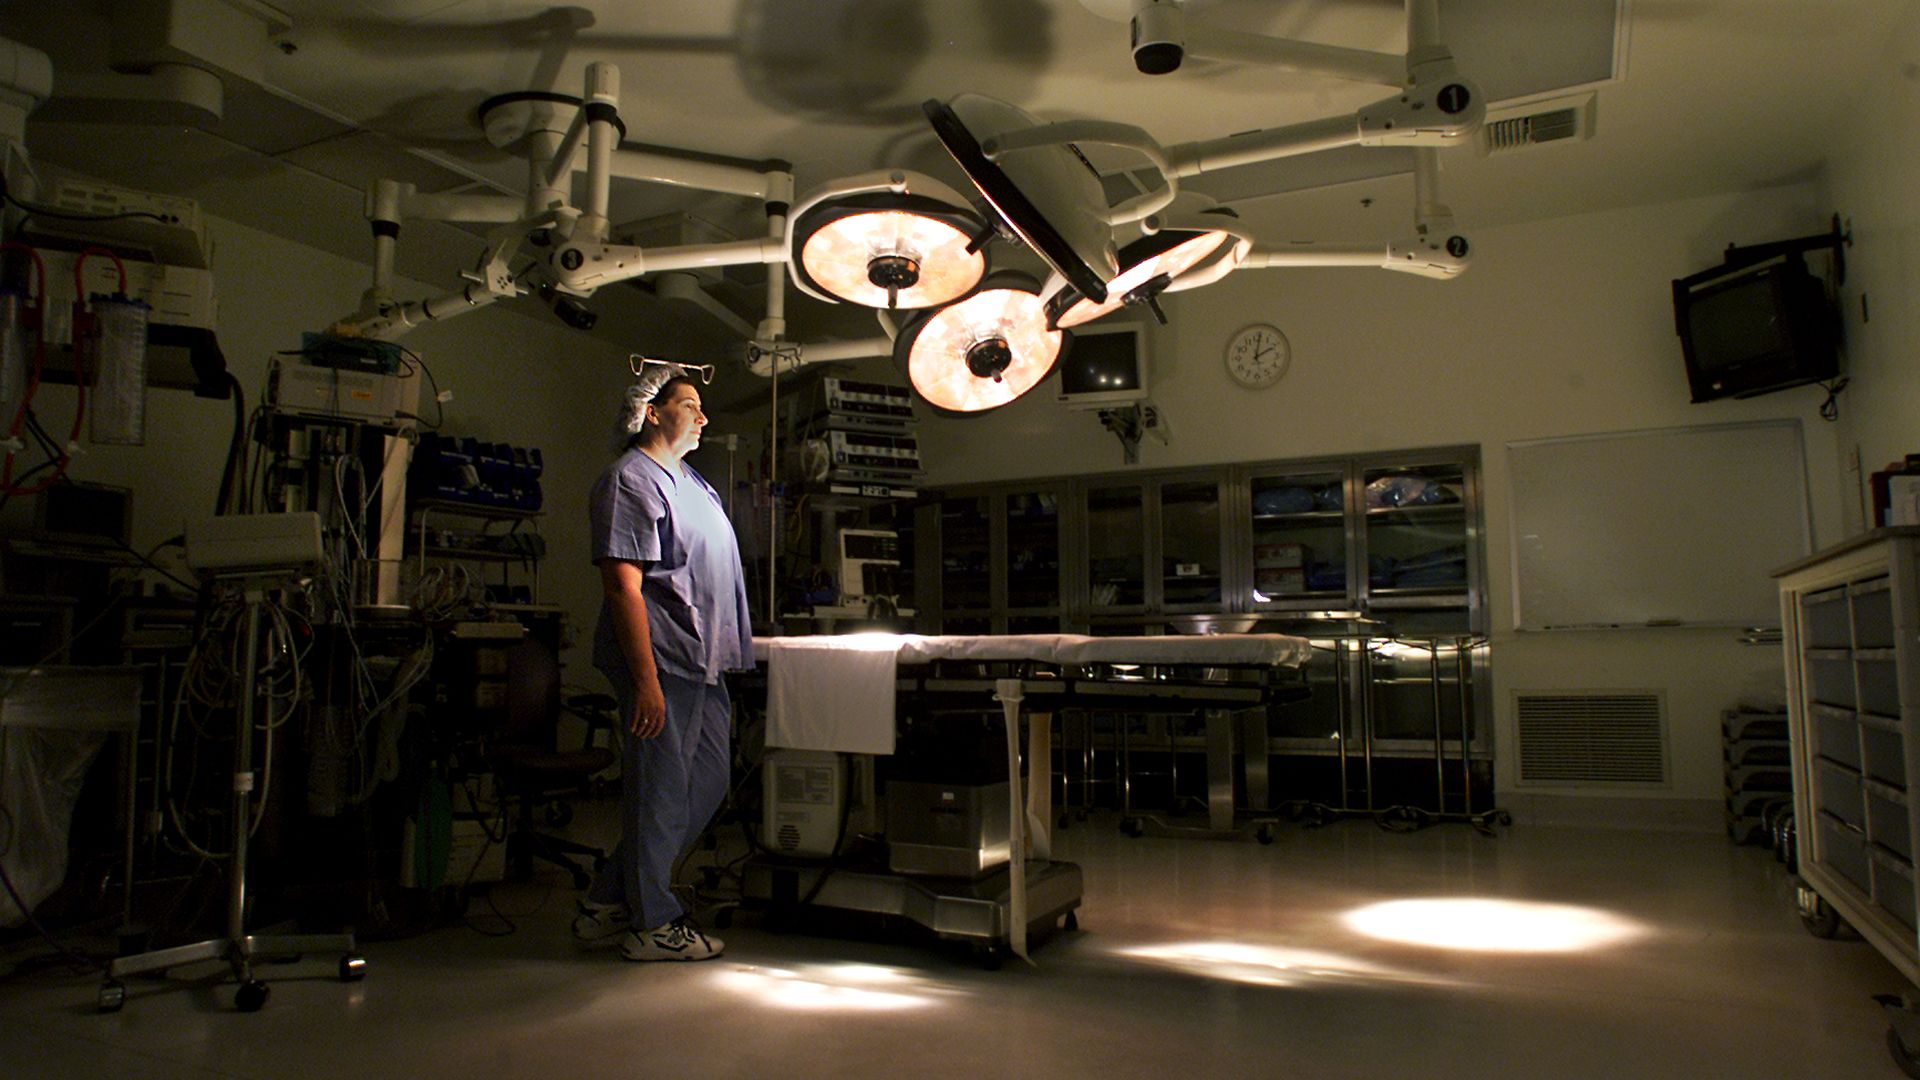 A nurse stands in an operating room.